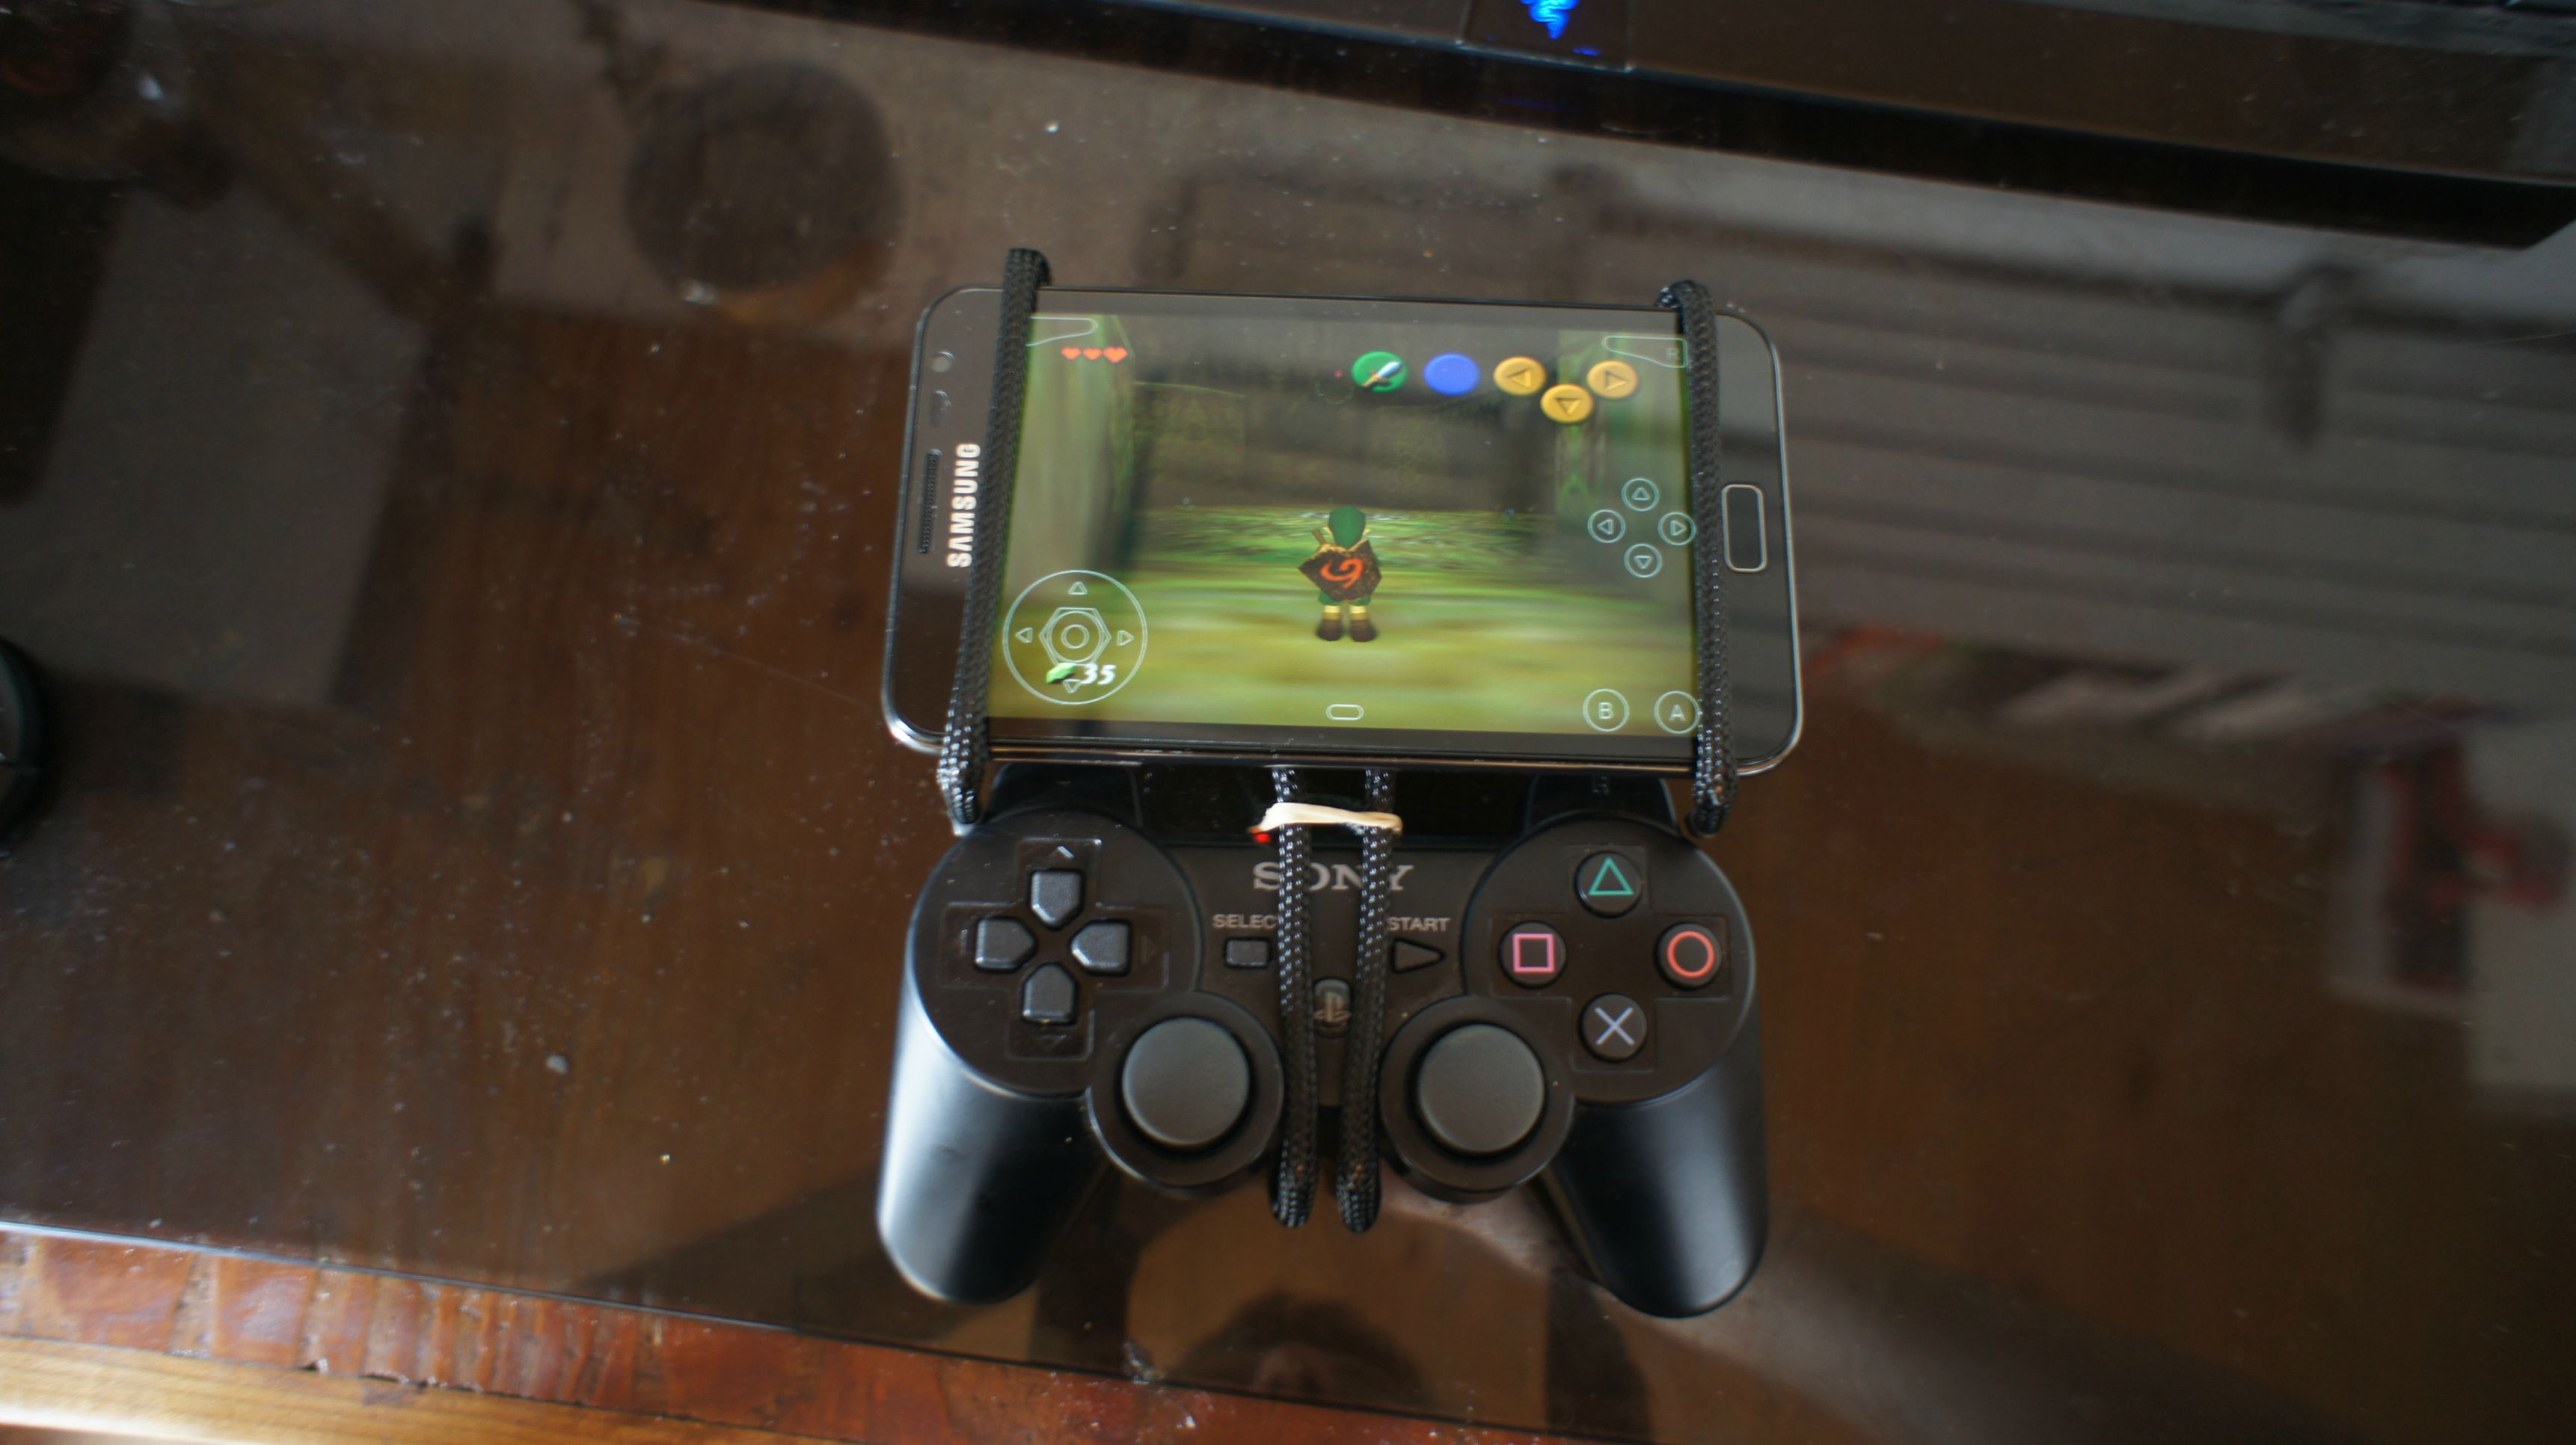 Gaming on the Galaxy Note just reached a whole new level - How to use a PlayStation 3 Sixaxis controller with your Android smartphone or tablet